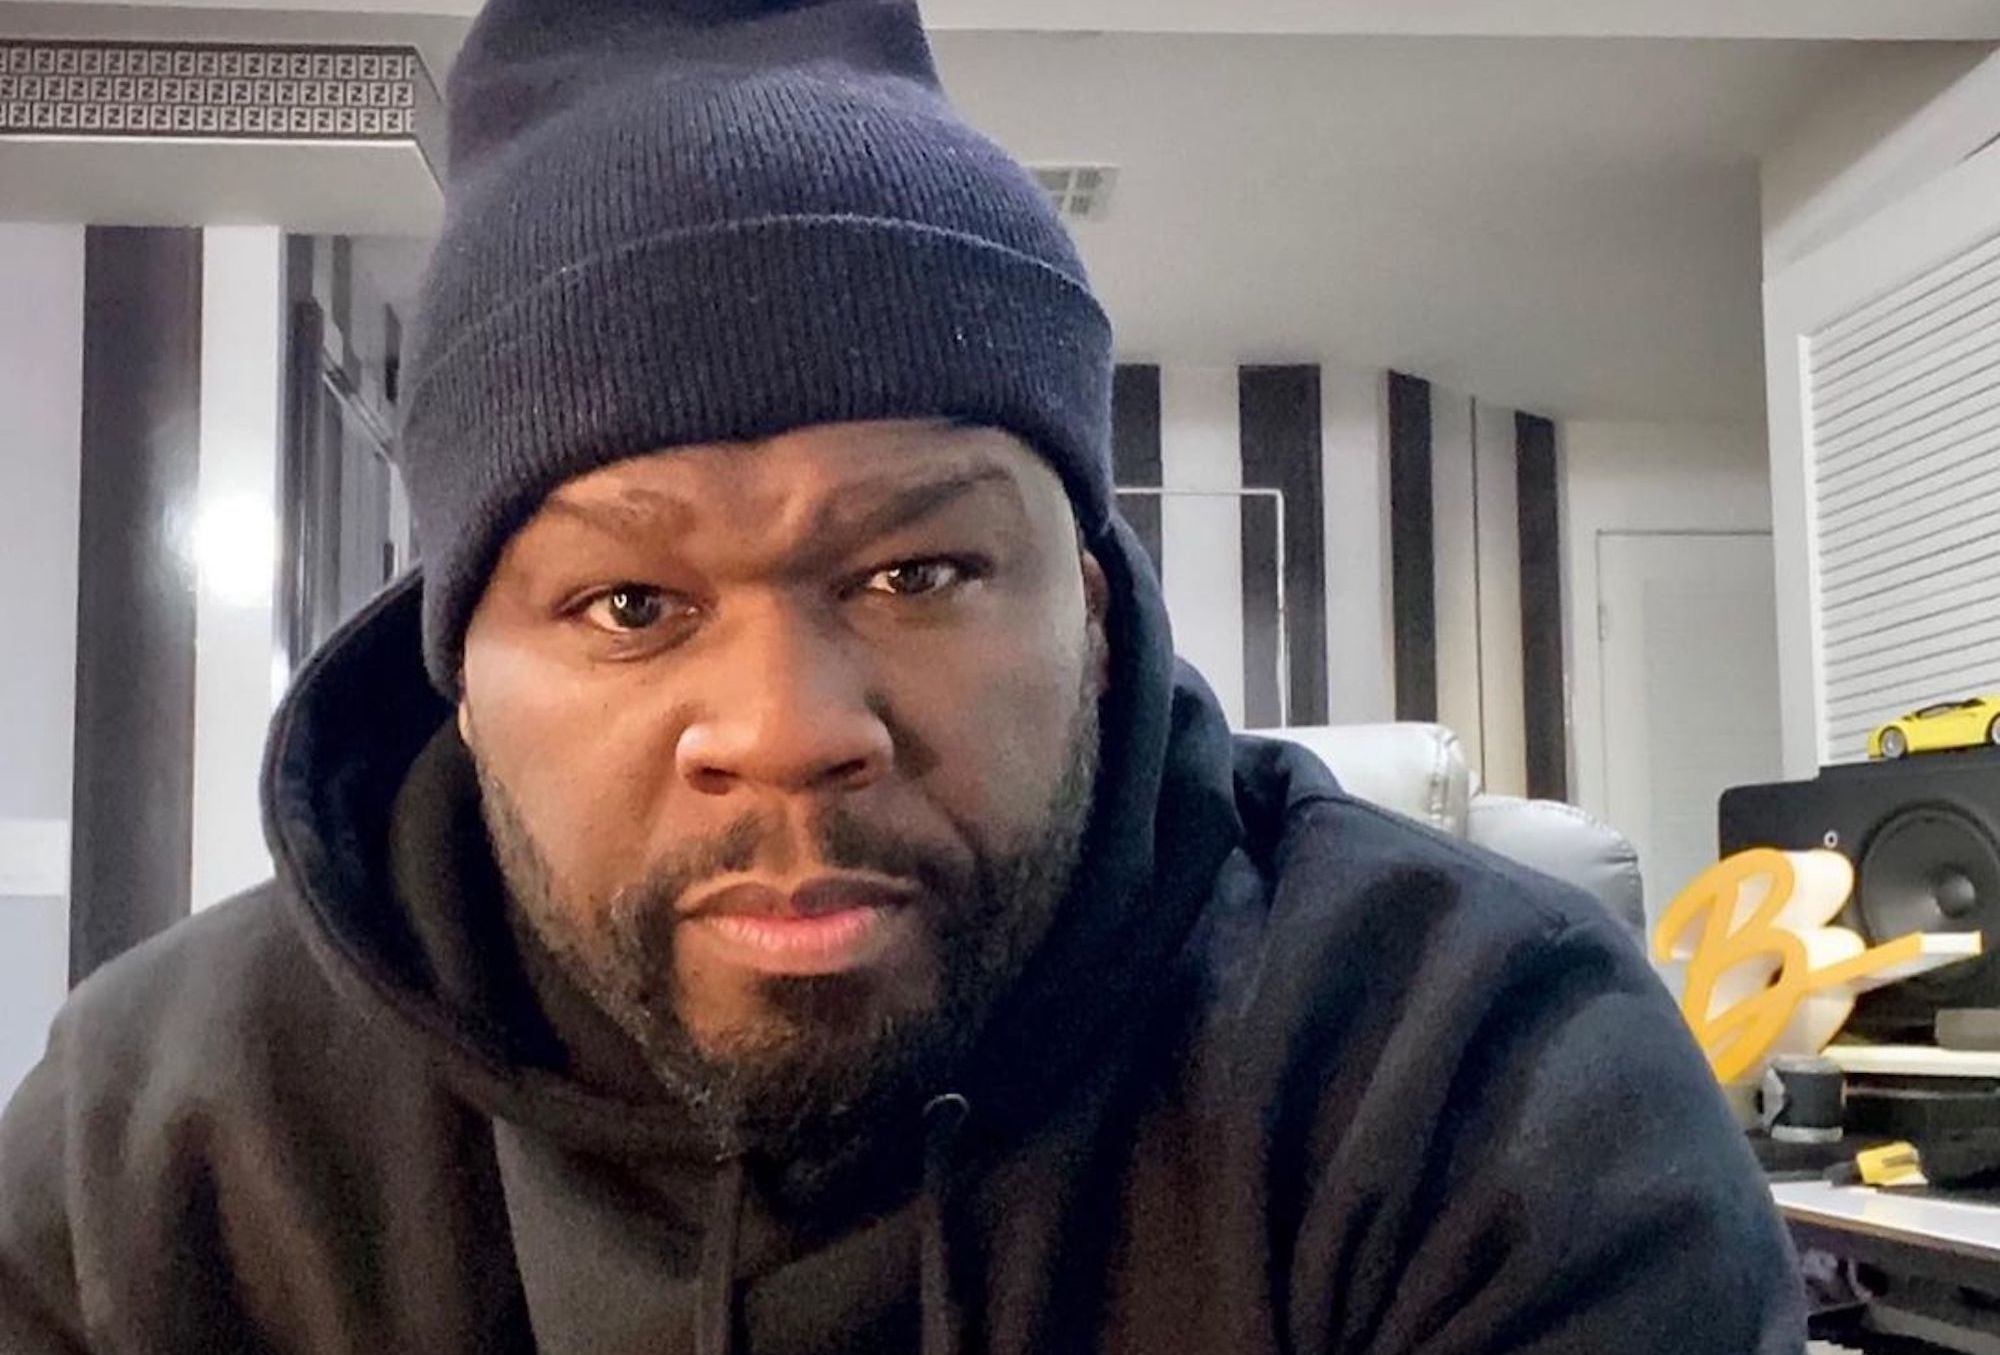 50 Cent Proclaim His Greatness After New Song Goes No. 1, "I'm Still 50